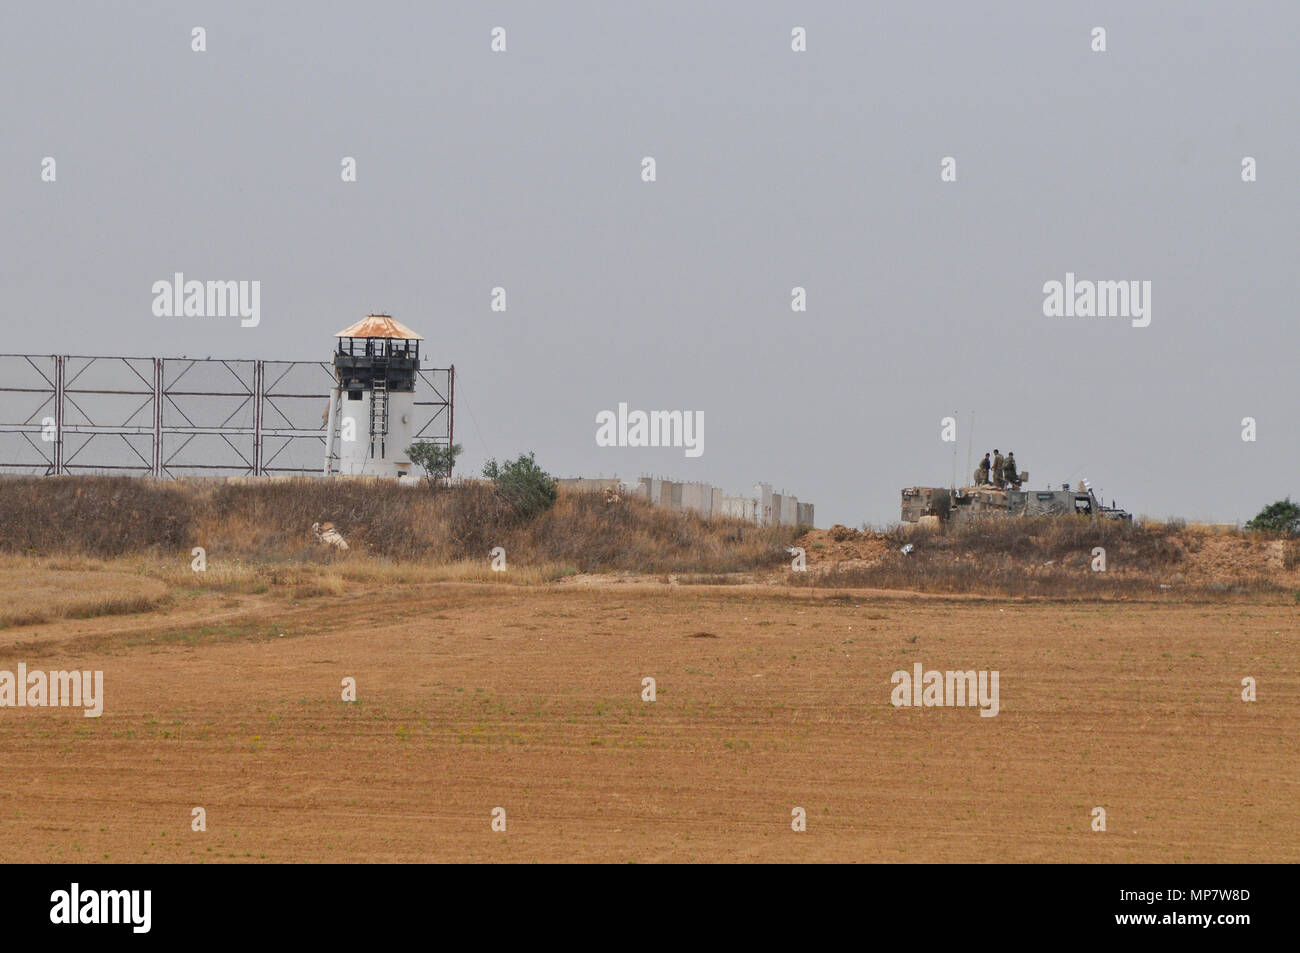 Israeli soldiers on patrol near the border fence between Israel and Palestine, the Gaza Strip Stock Photo